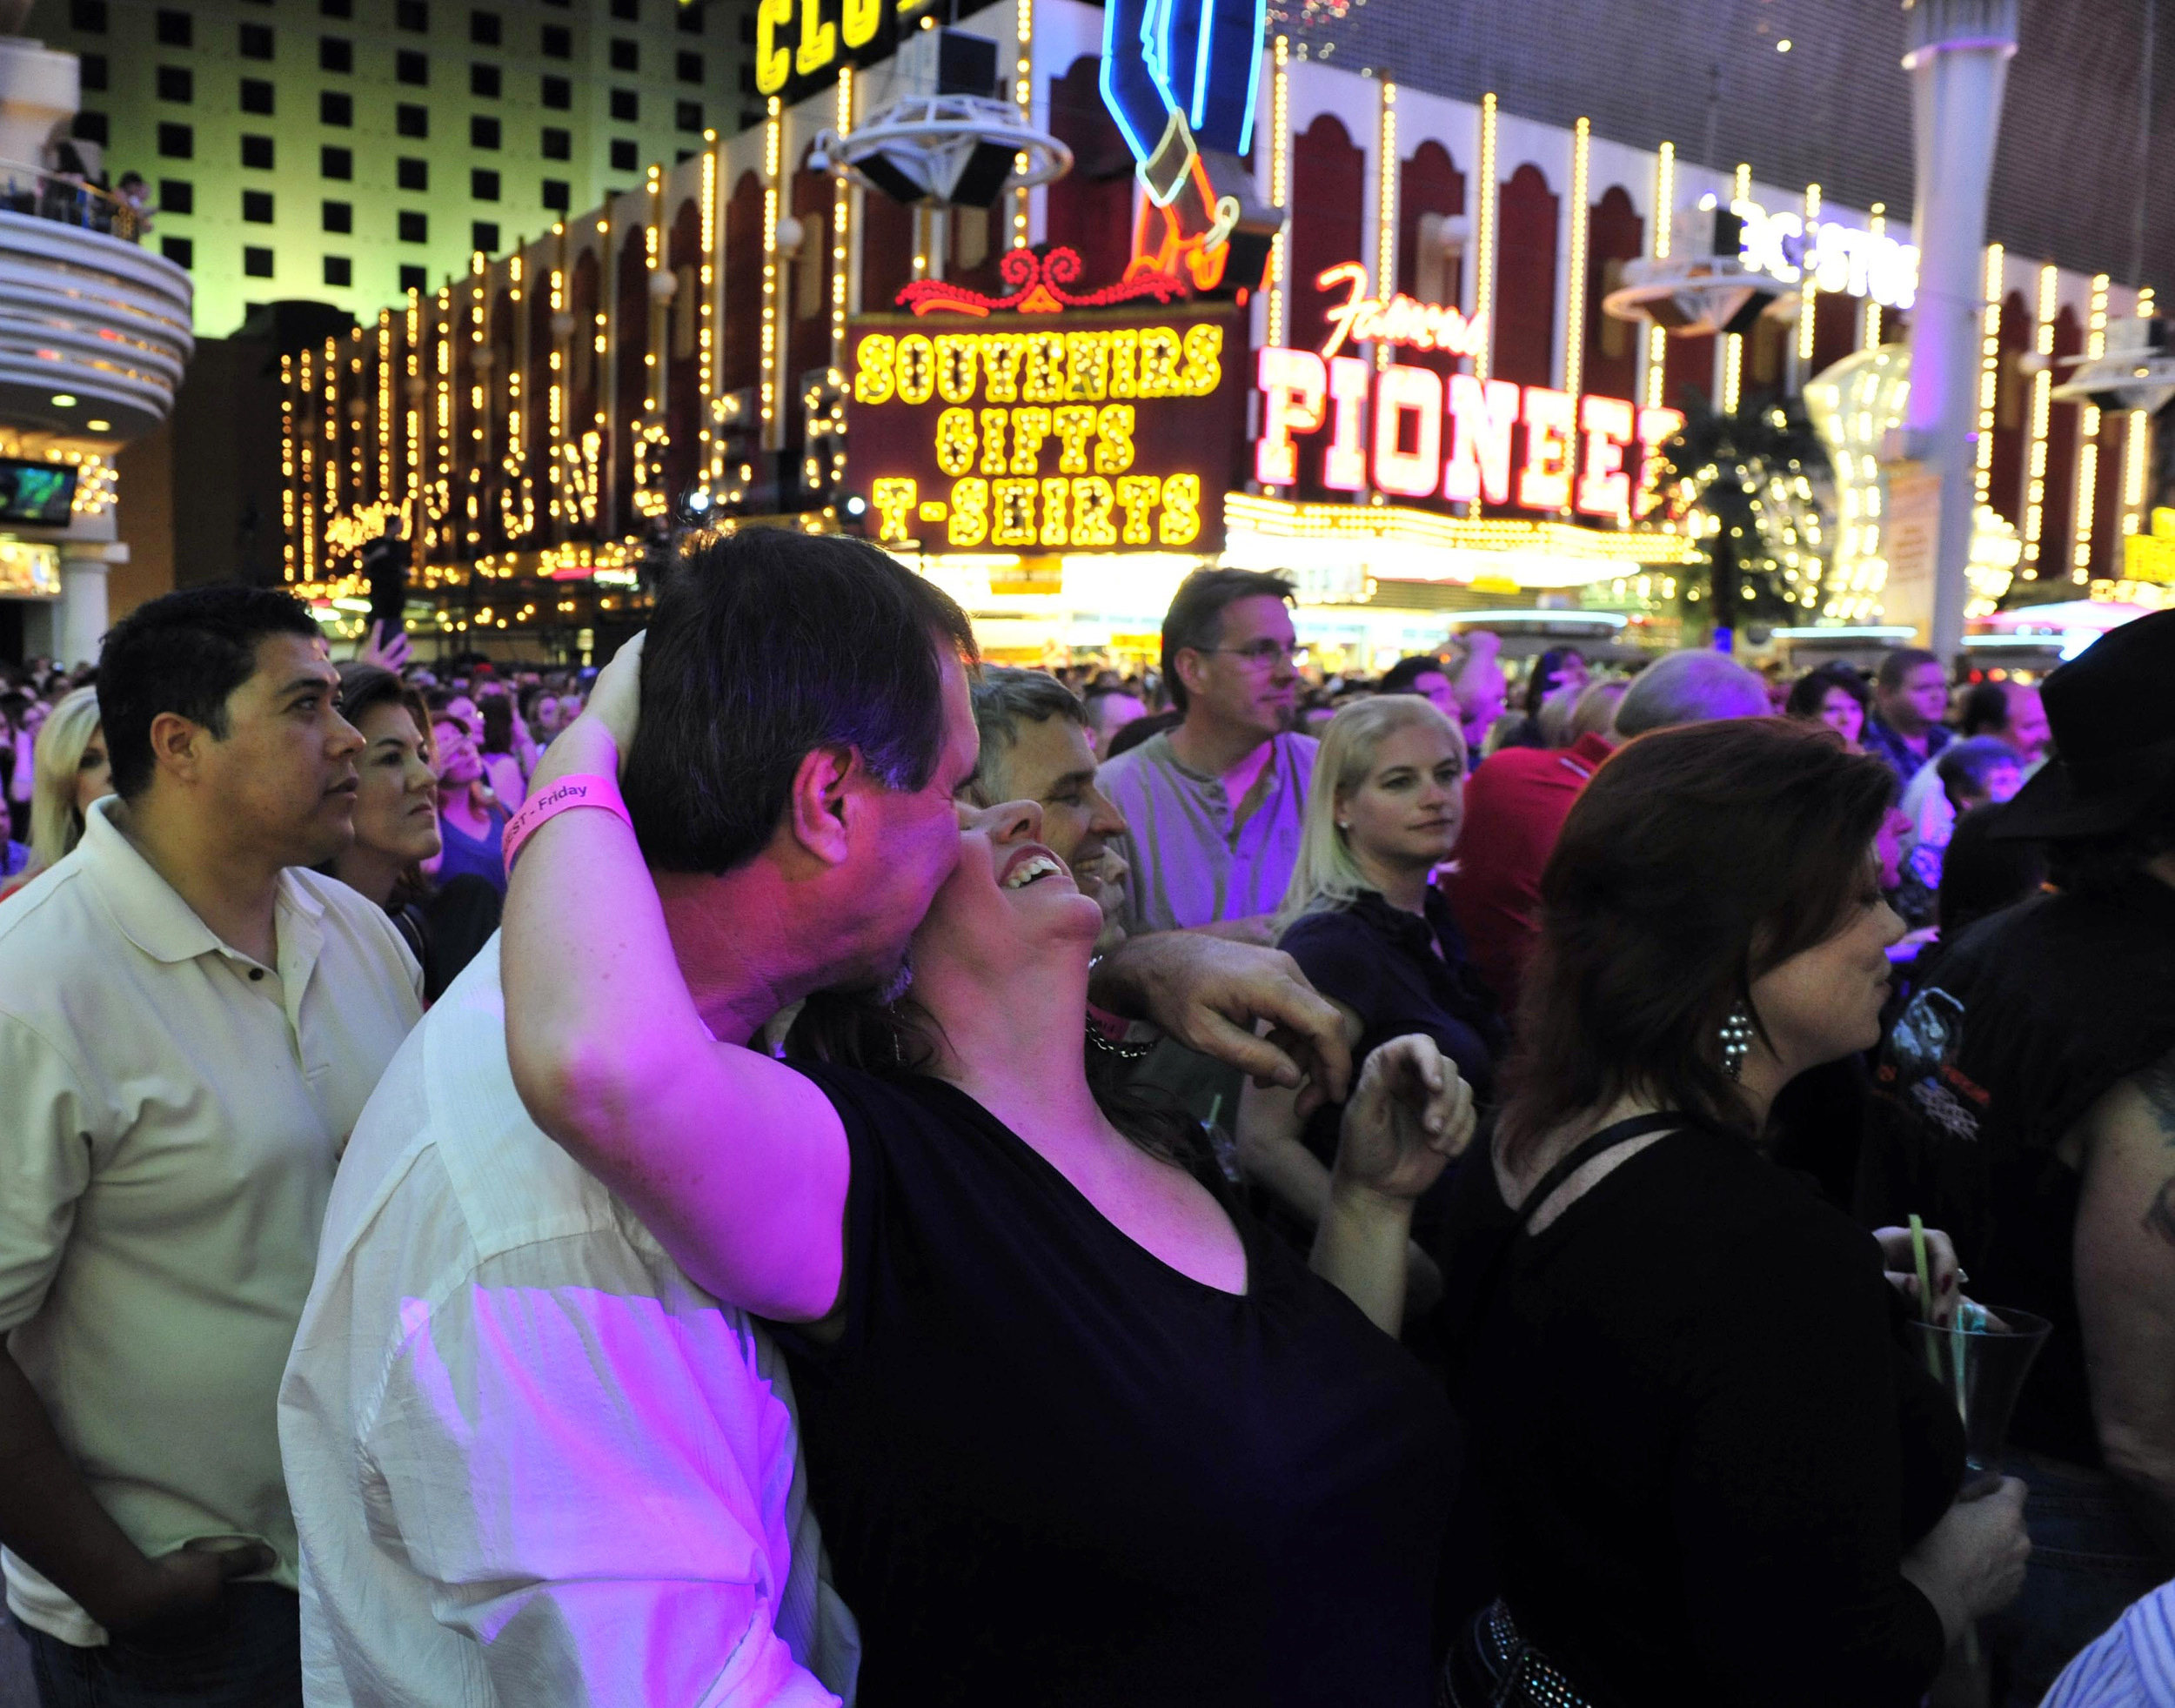  A couple dances and kisses while watching Scotty McCreery perform during ACM week March 30, 2012 in Las Vegas, Nev.  